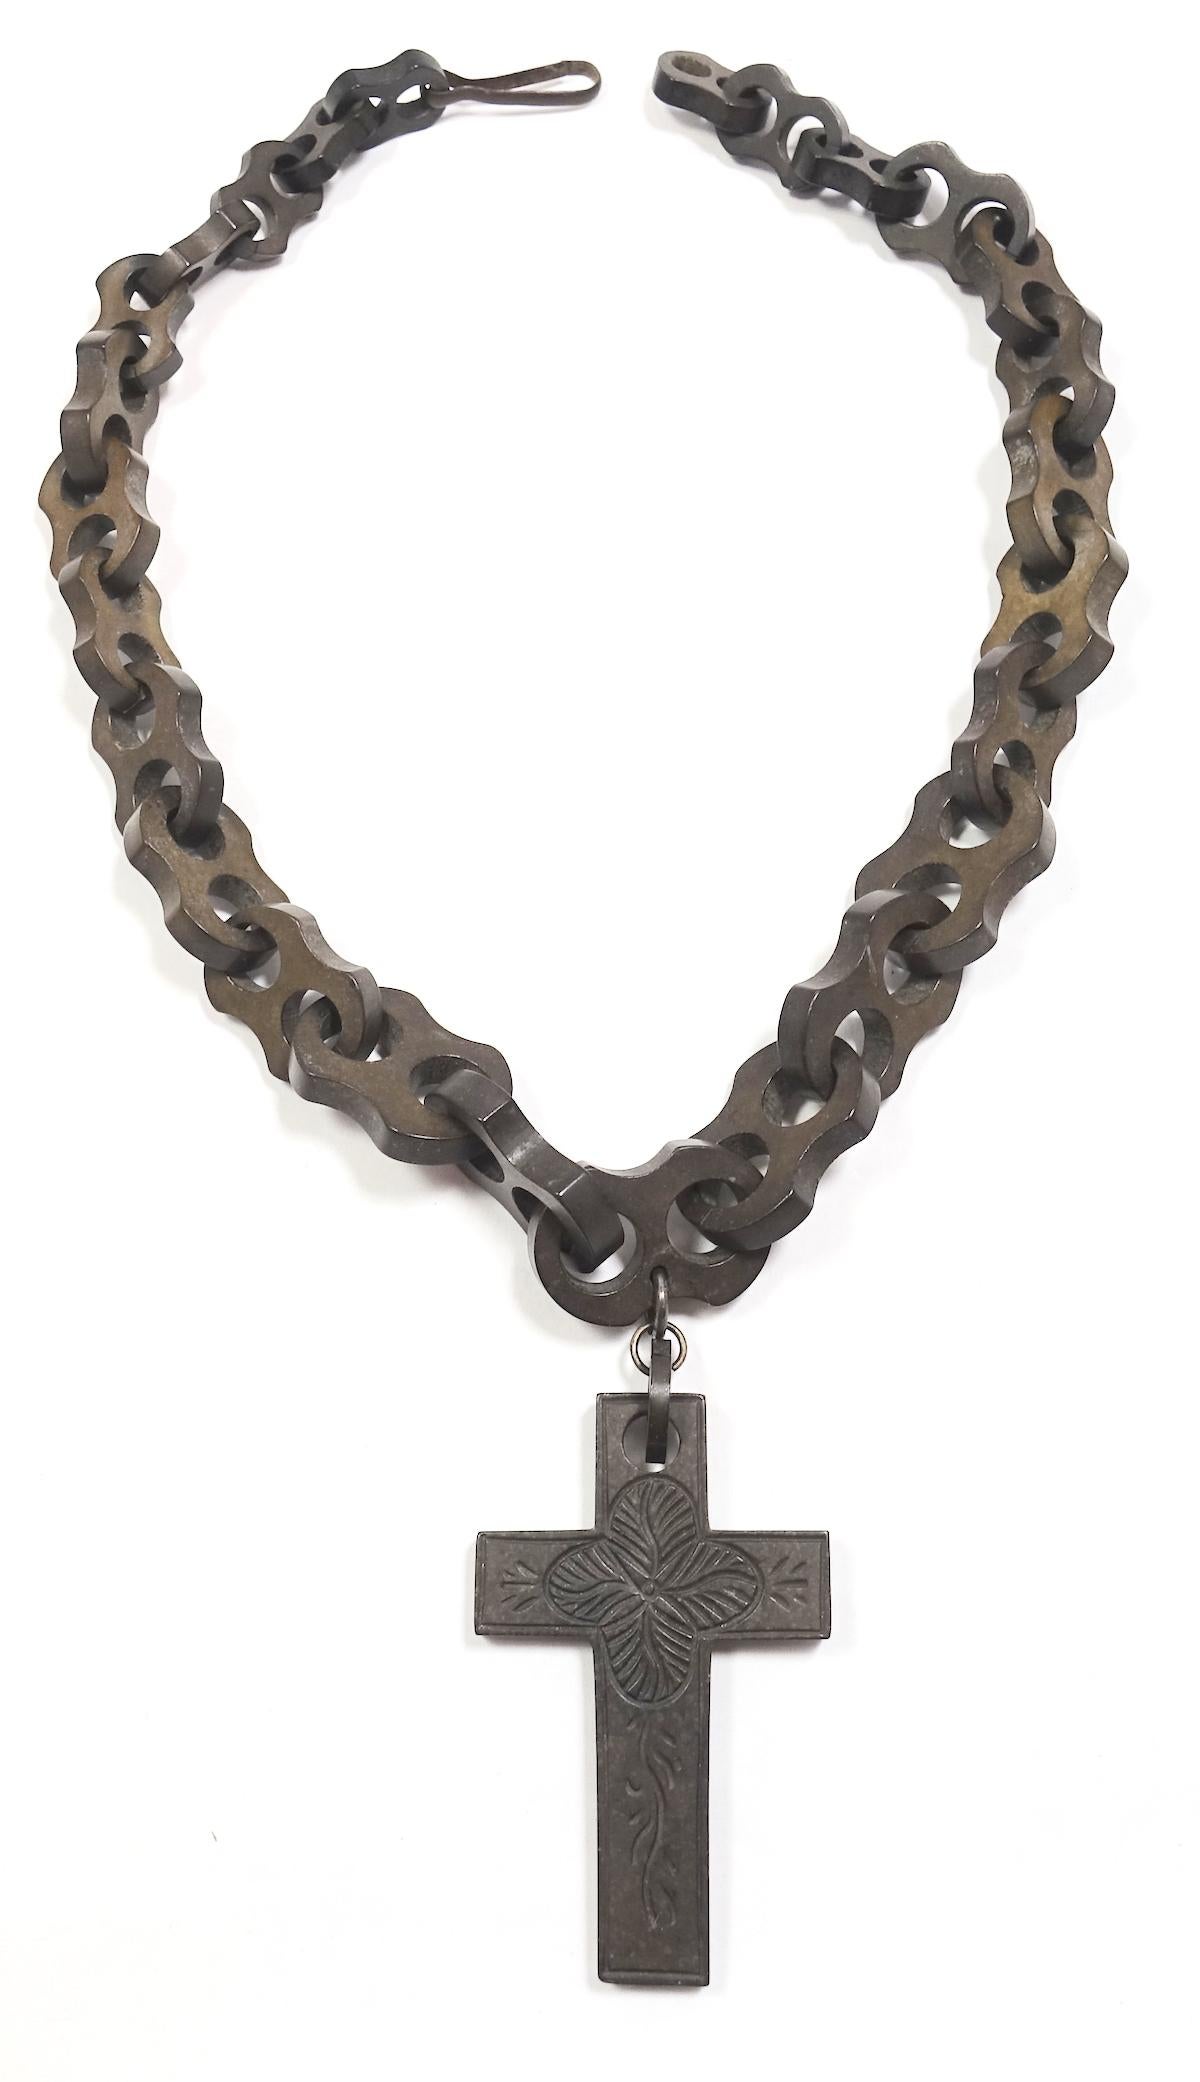 This Victorian Gutta Percha necklace features a heavily etched cross pendant on a continuous link chain with pressure closure.  Gutta Percha, like this, is made from the same wood and is considered collectible art. The cross pendant measures 2-3/4”